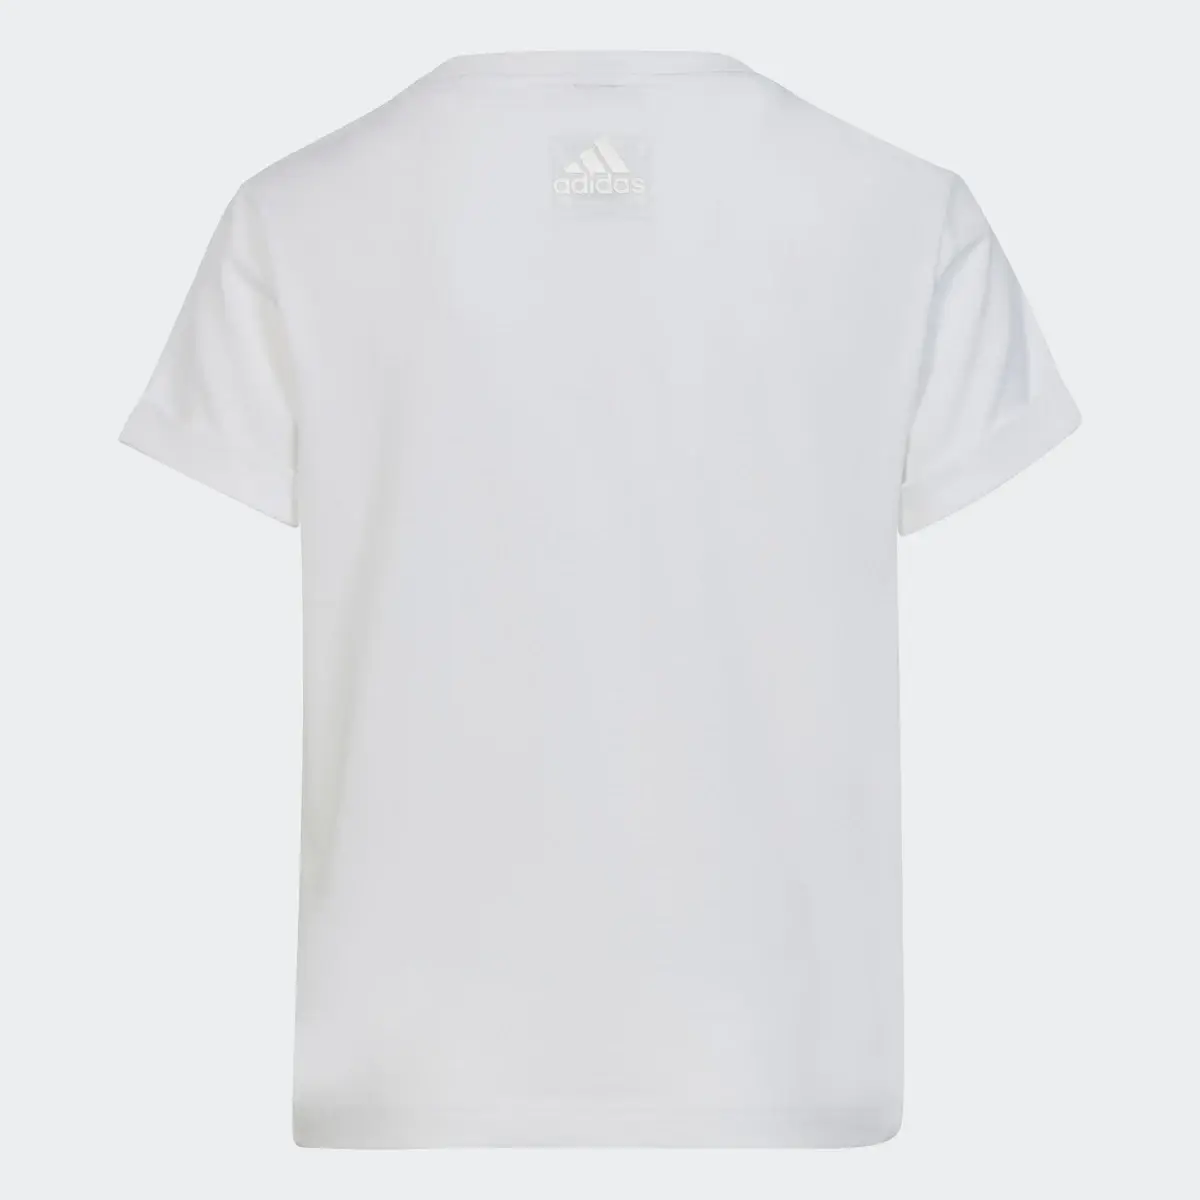 Adidas Dance Knotted Tee. 2